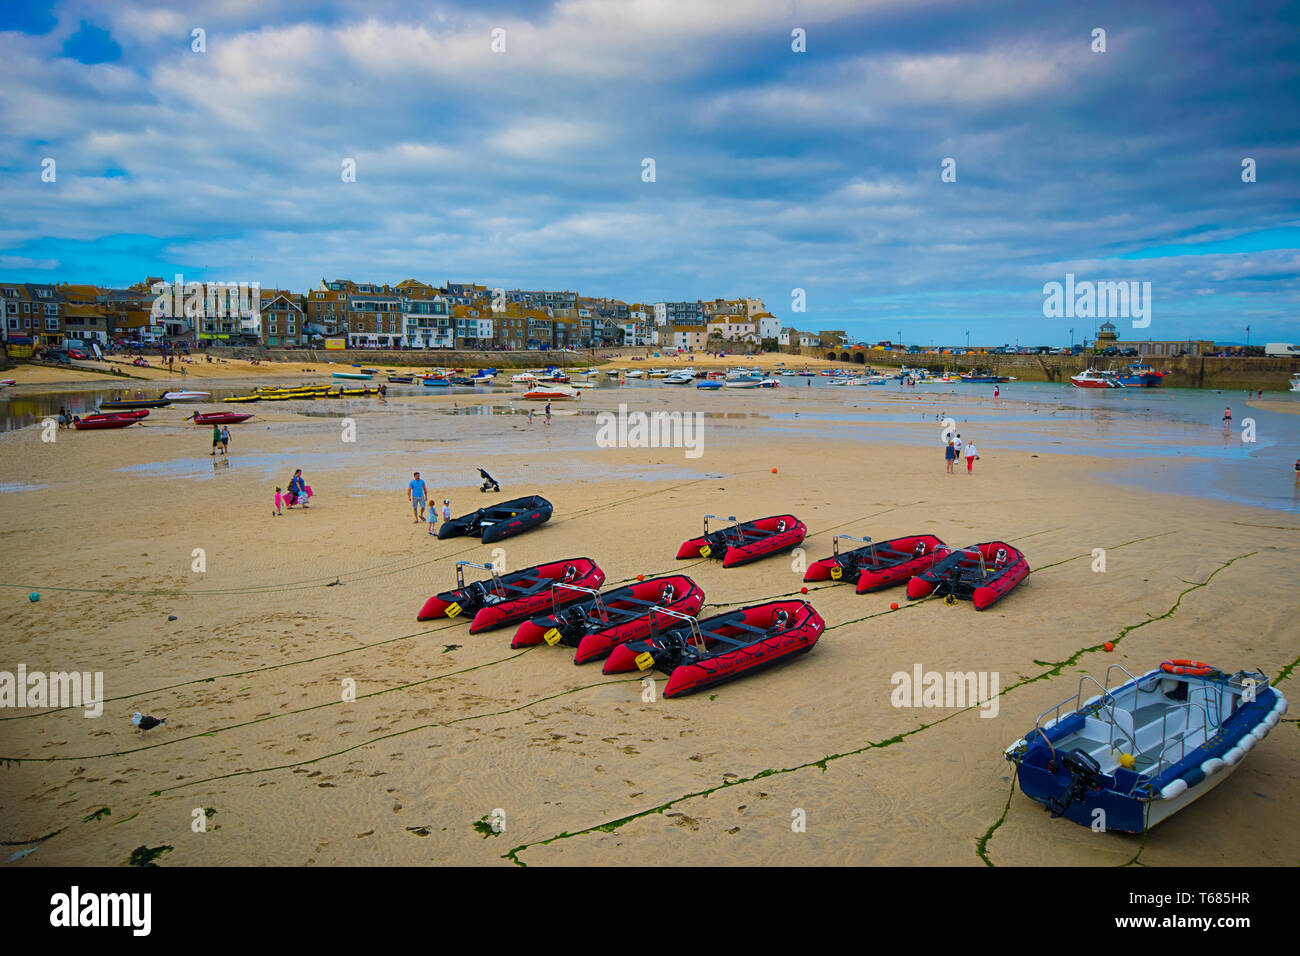 Dinghy style hire boats on the shore of St Ives, Cornwall, UK. Stock Photo